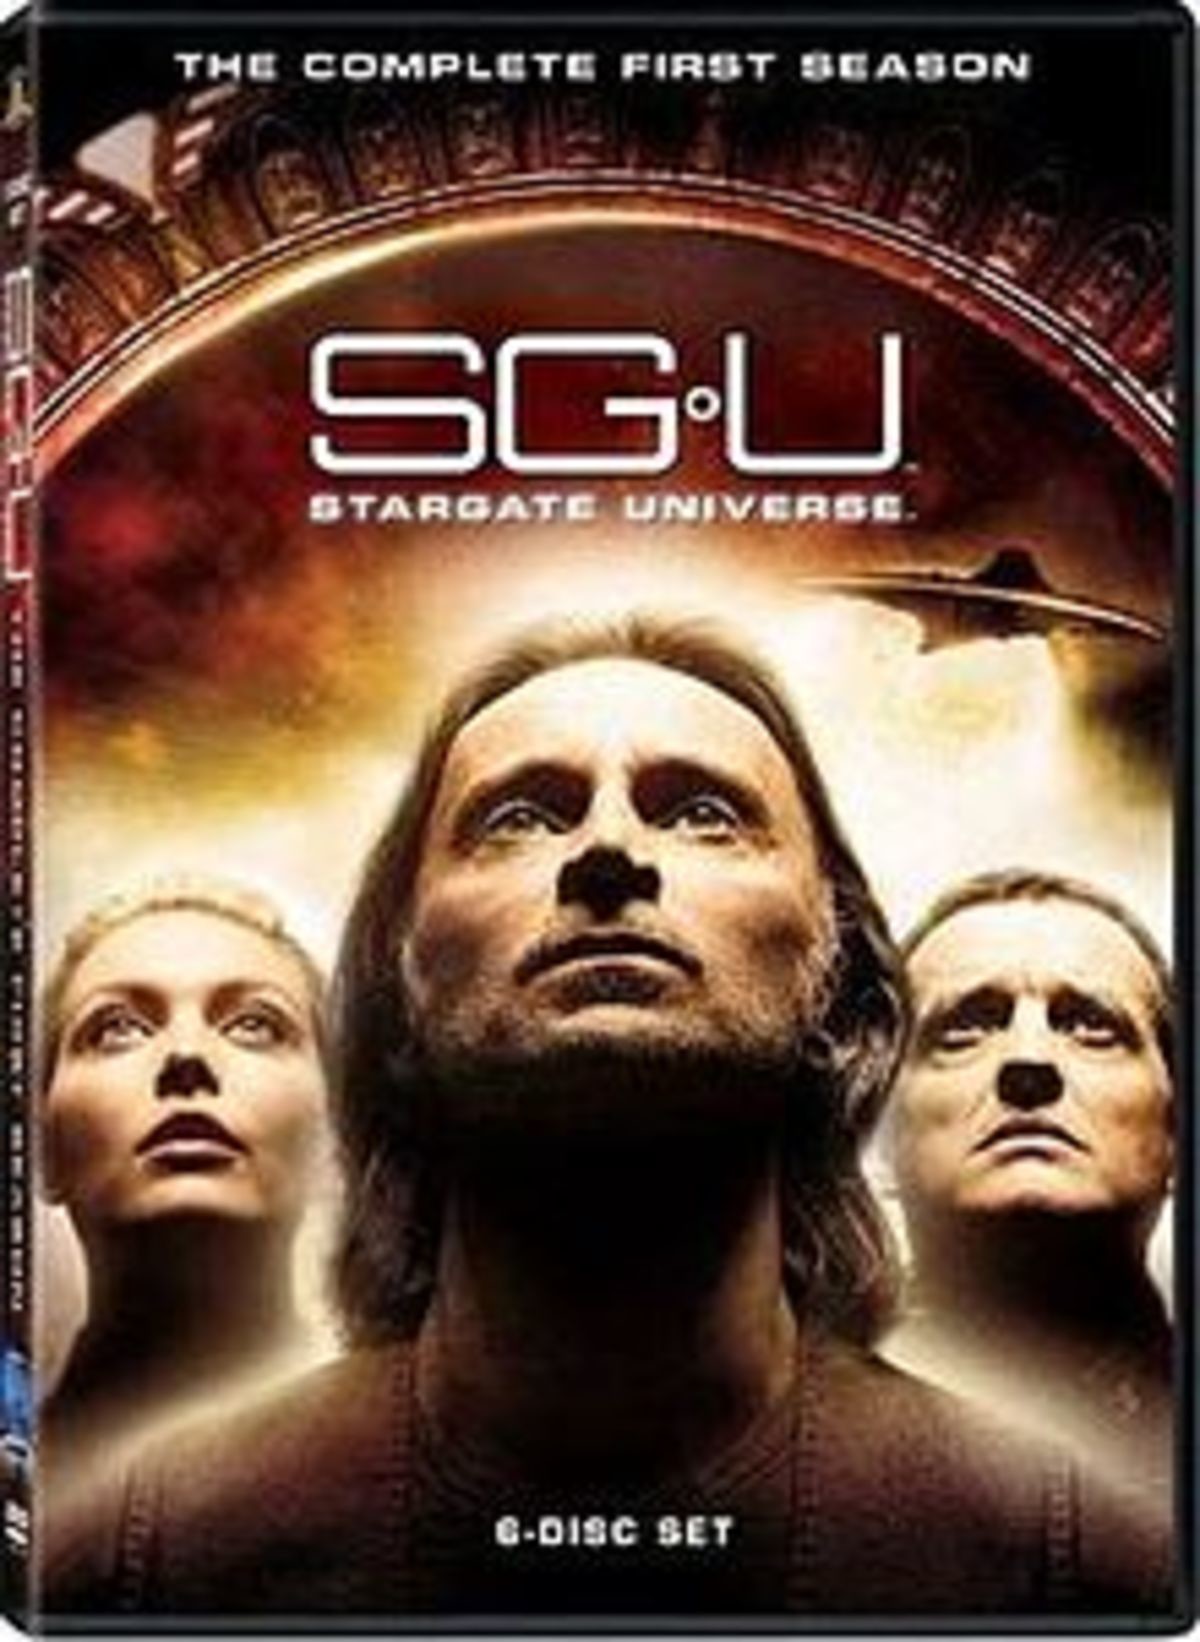 SGU is underrated. Rewatched SG-1 when it came on Netflix, then continued on rewatching all of Atlantis and now Universe. Universe was hated by so many, but it 